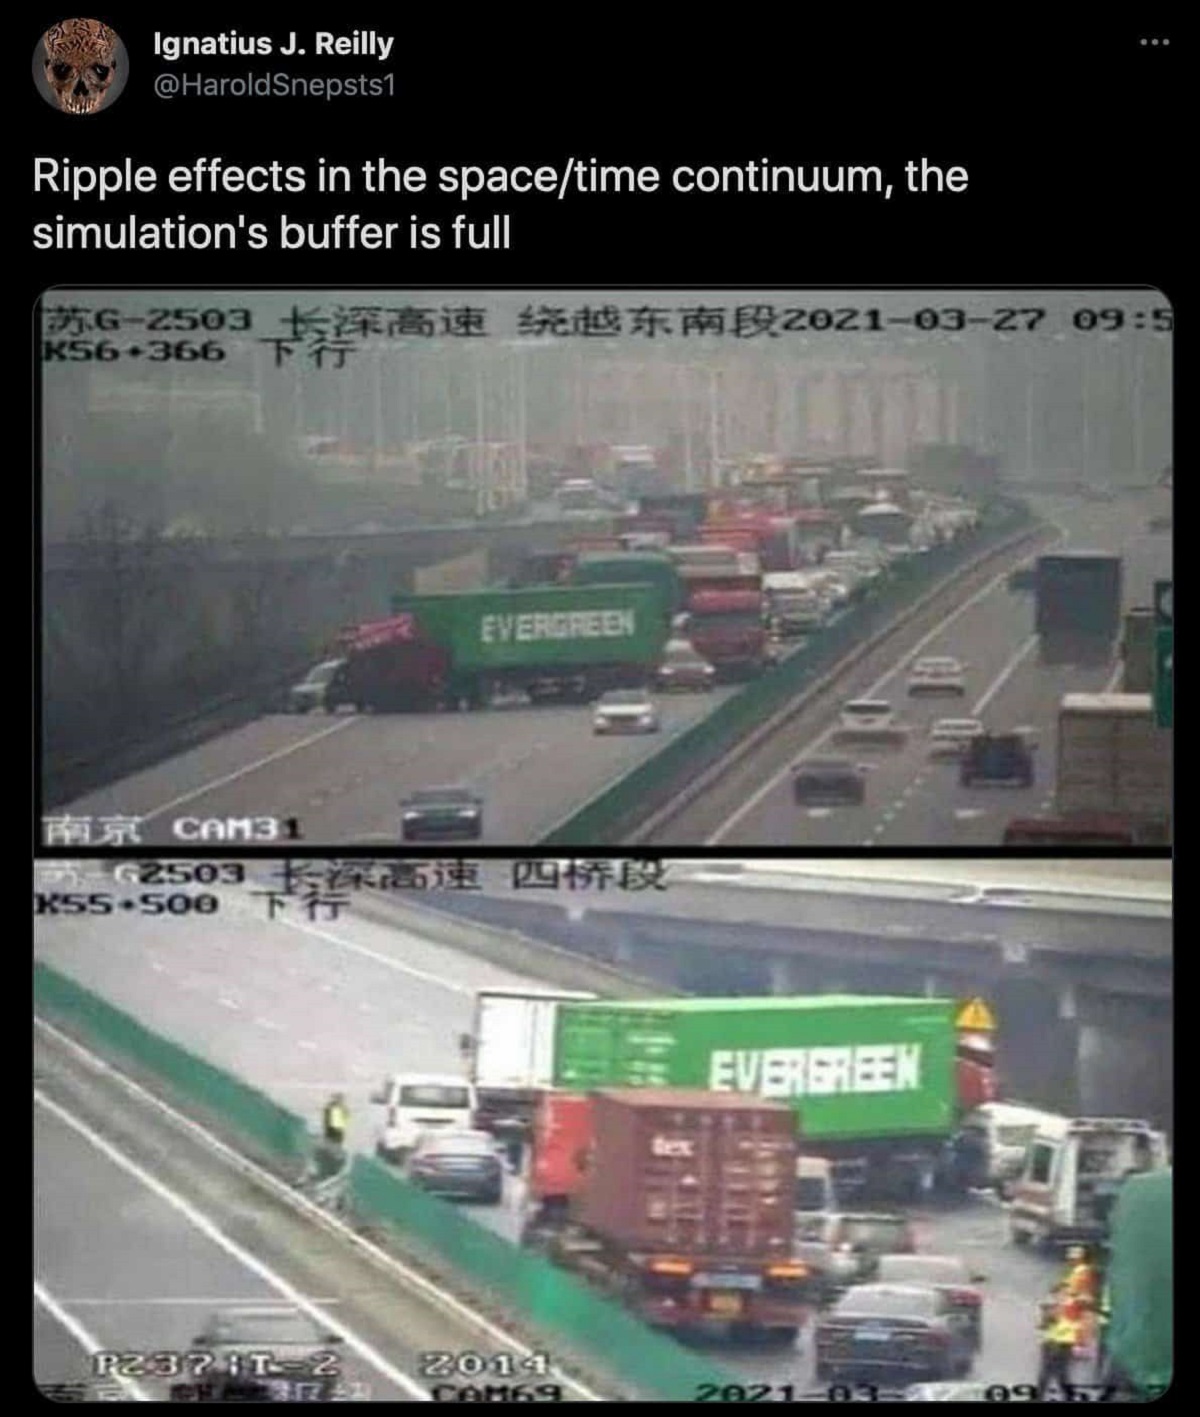 evergreen truck blocks highway - Ignatius J. Reilly Ripple effects in the spacetime continuum, the simulation's buffer is full G2503 K56 366 Fit Evergreen CAM31 62503 K55500 F Evergreen tex P237 T2 2014 CAM69 202103